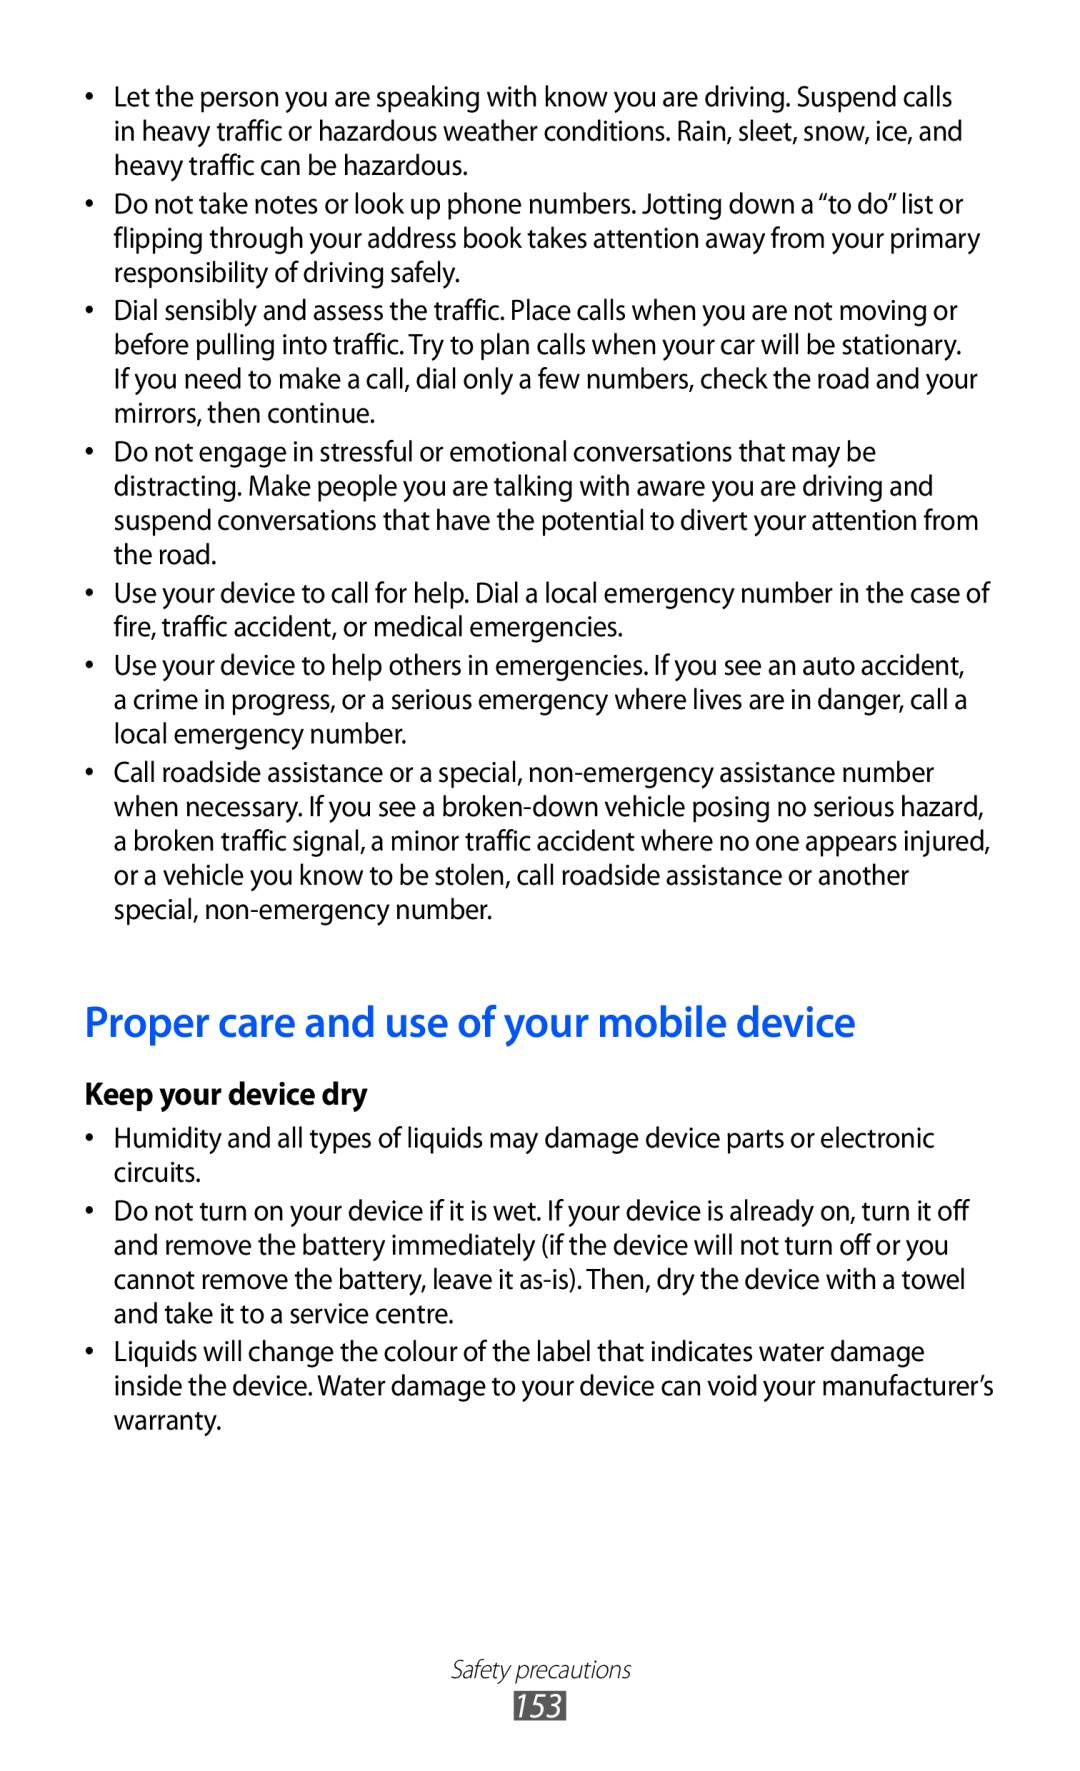 Samsung GT-I9070 user manual Proper care and use of your mobile device, Keep your device dry 